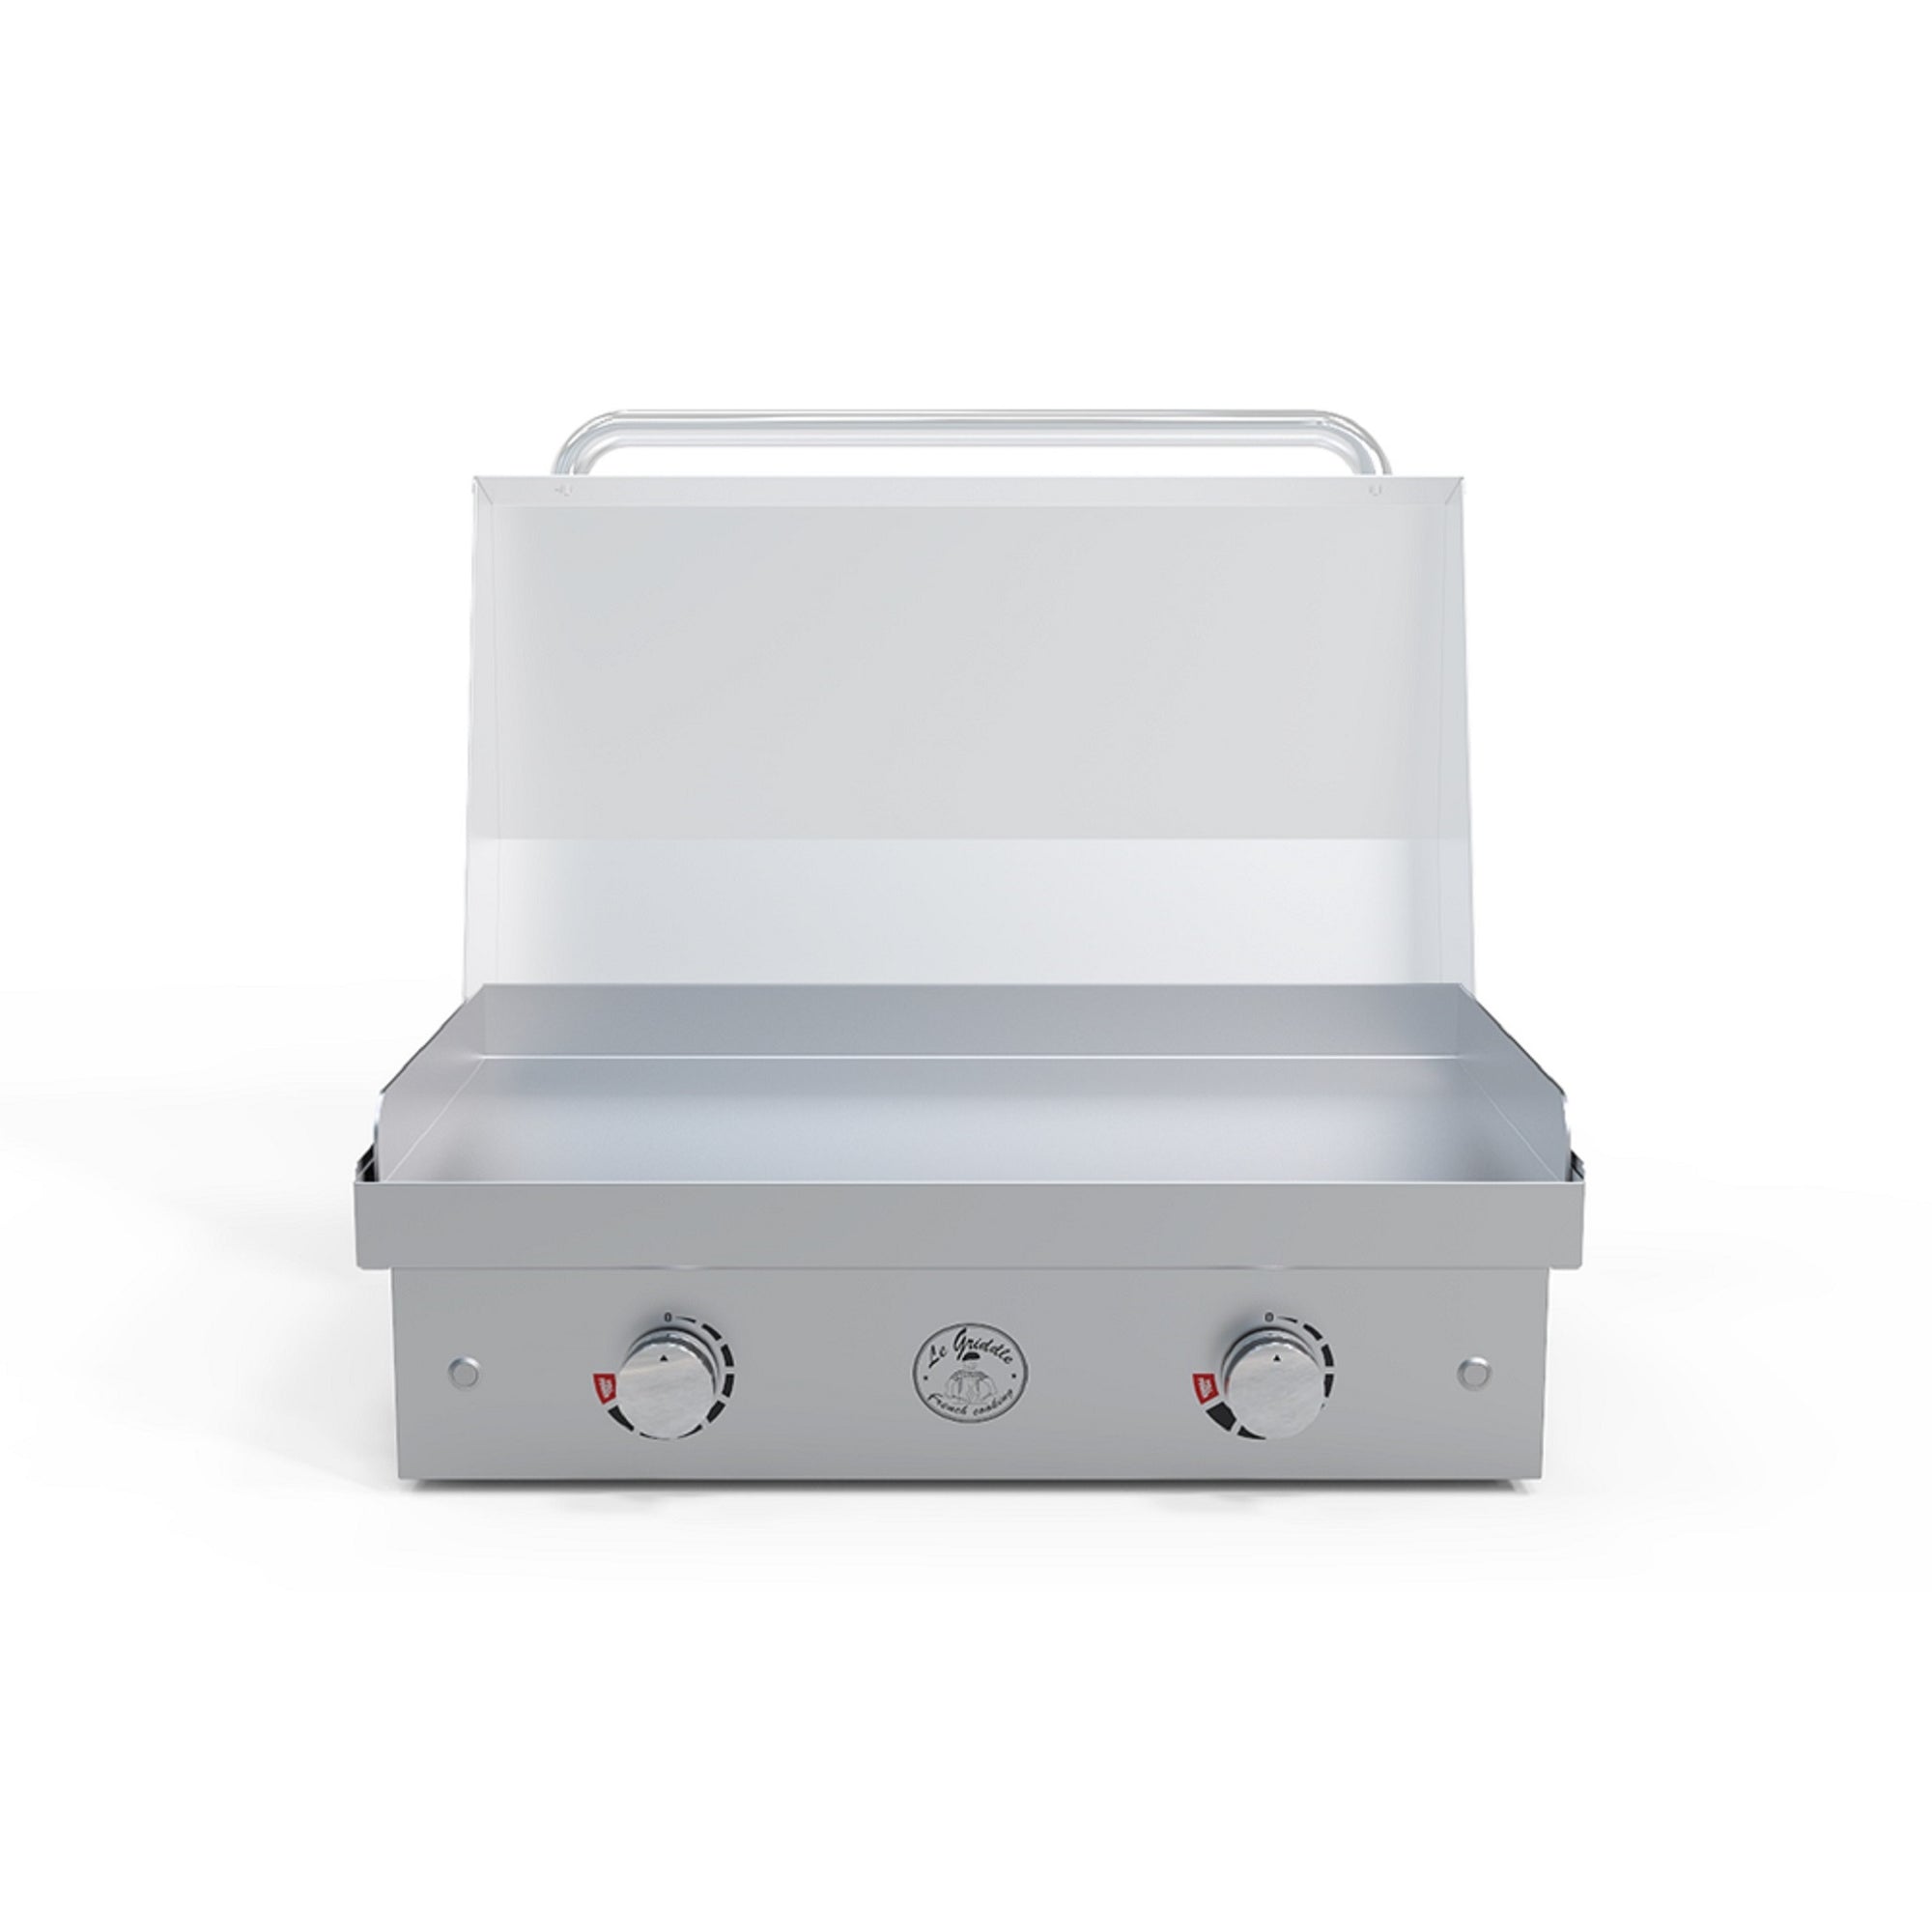 Le Griddle-2 burner electric - 304 Stainless Steel Construction in a white background front view